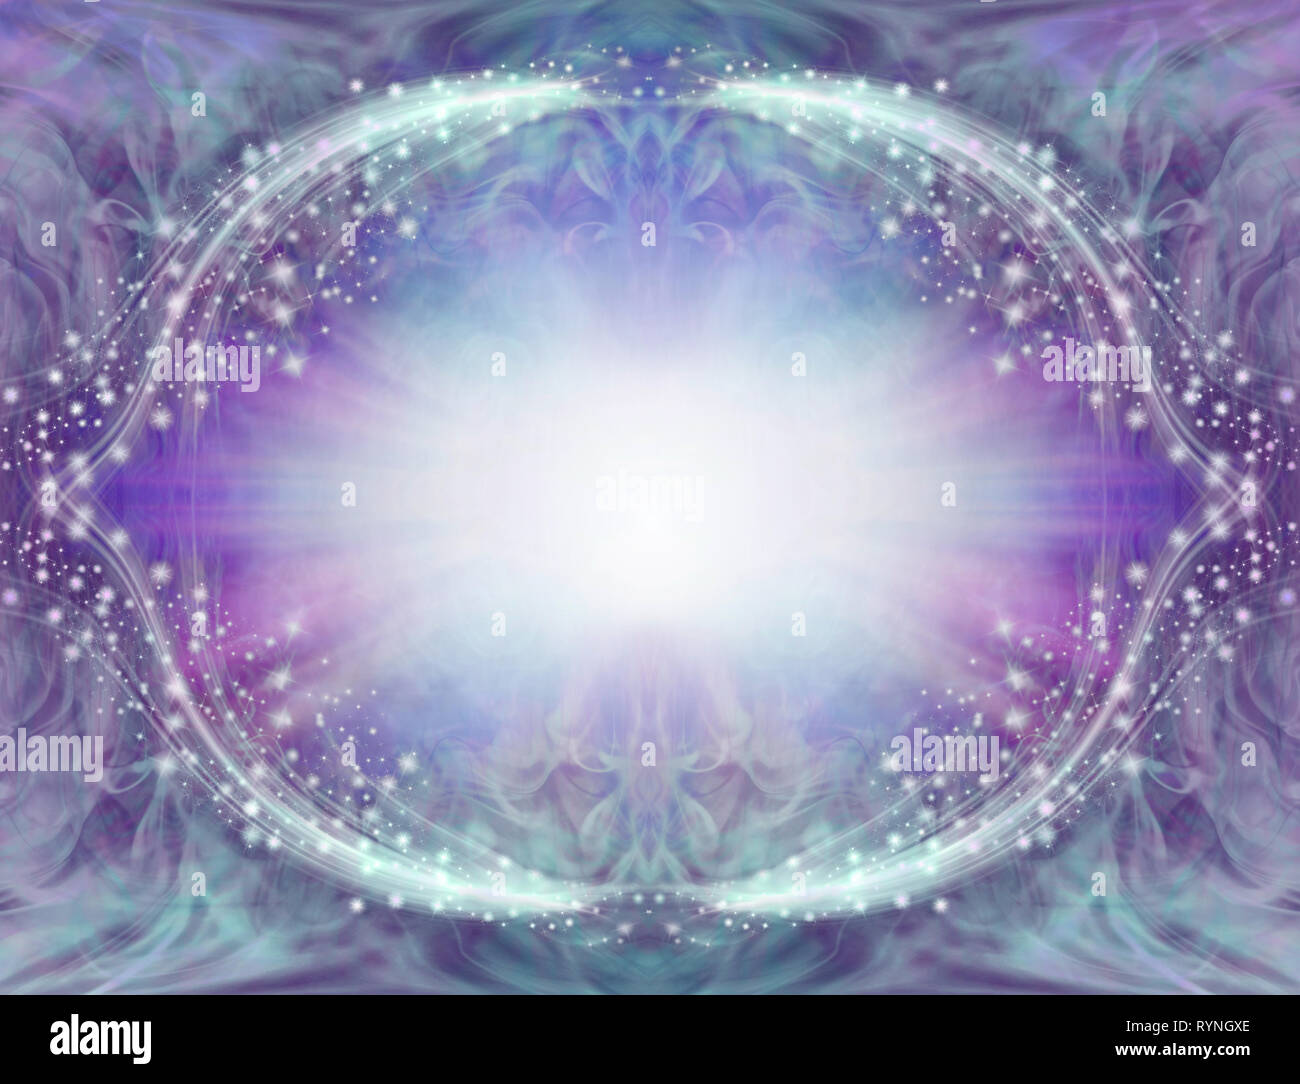 Blue Purple Sparkling Angelic Border Frame - central light burst surrounded by symmetrical oval sparkling white border with pink purple edging Stock Photo